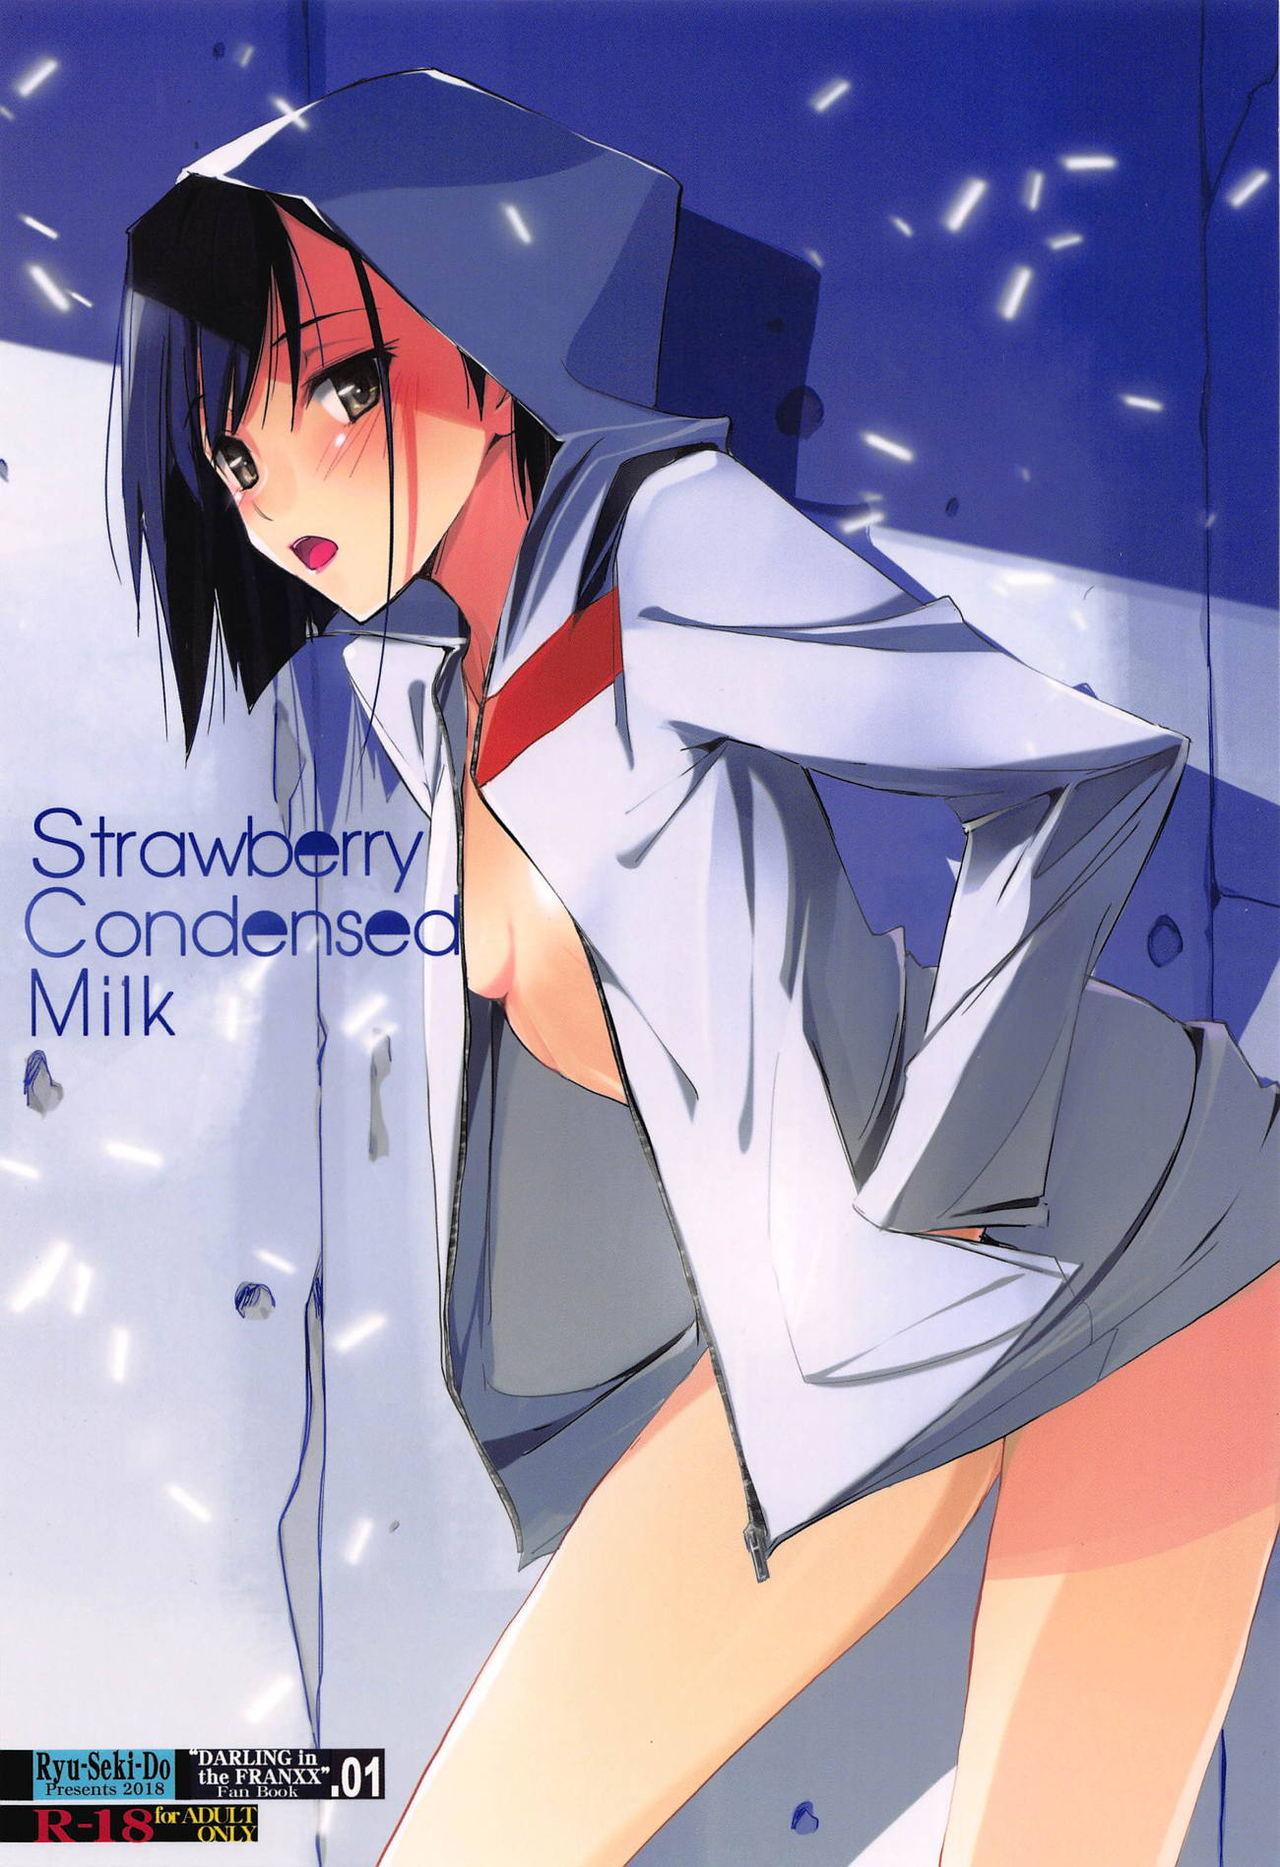 Asians Strawberry Condensed Milk - Darling in the franxx Couple - Picture 1